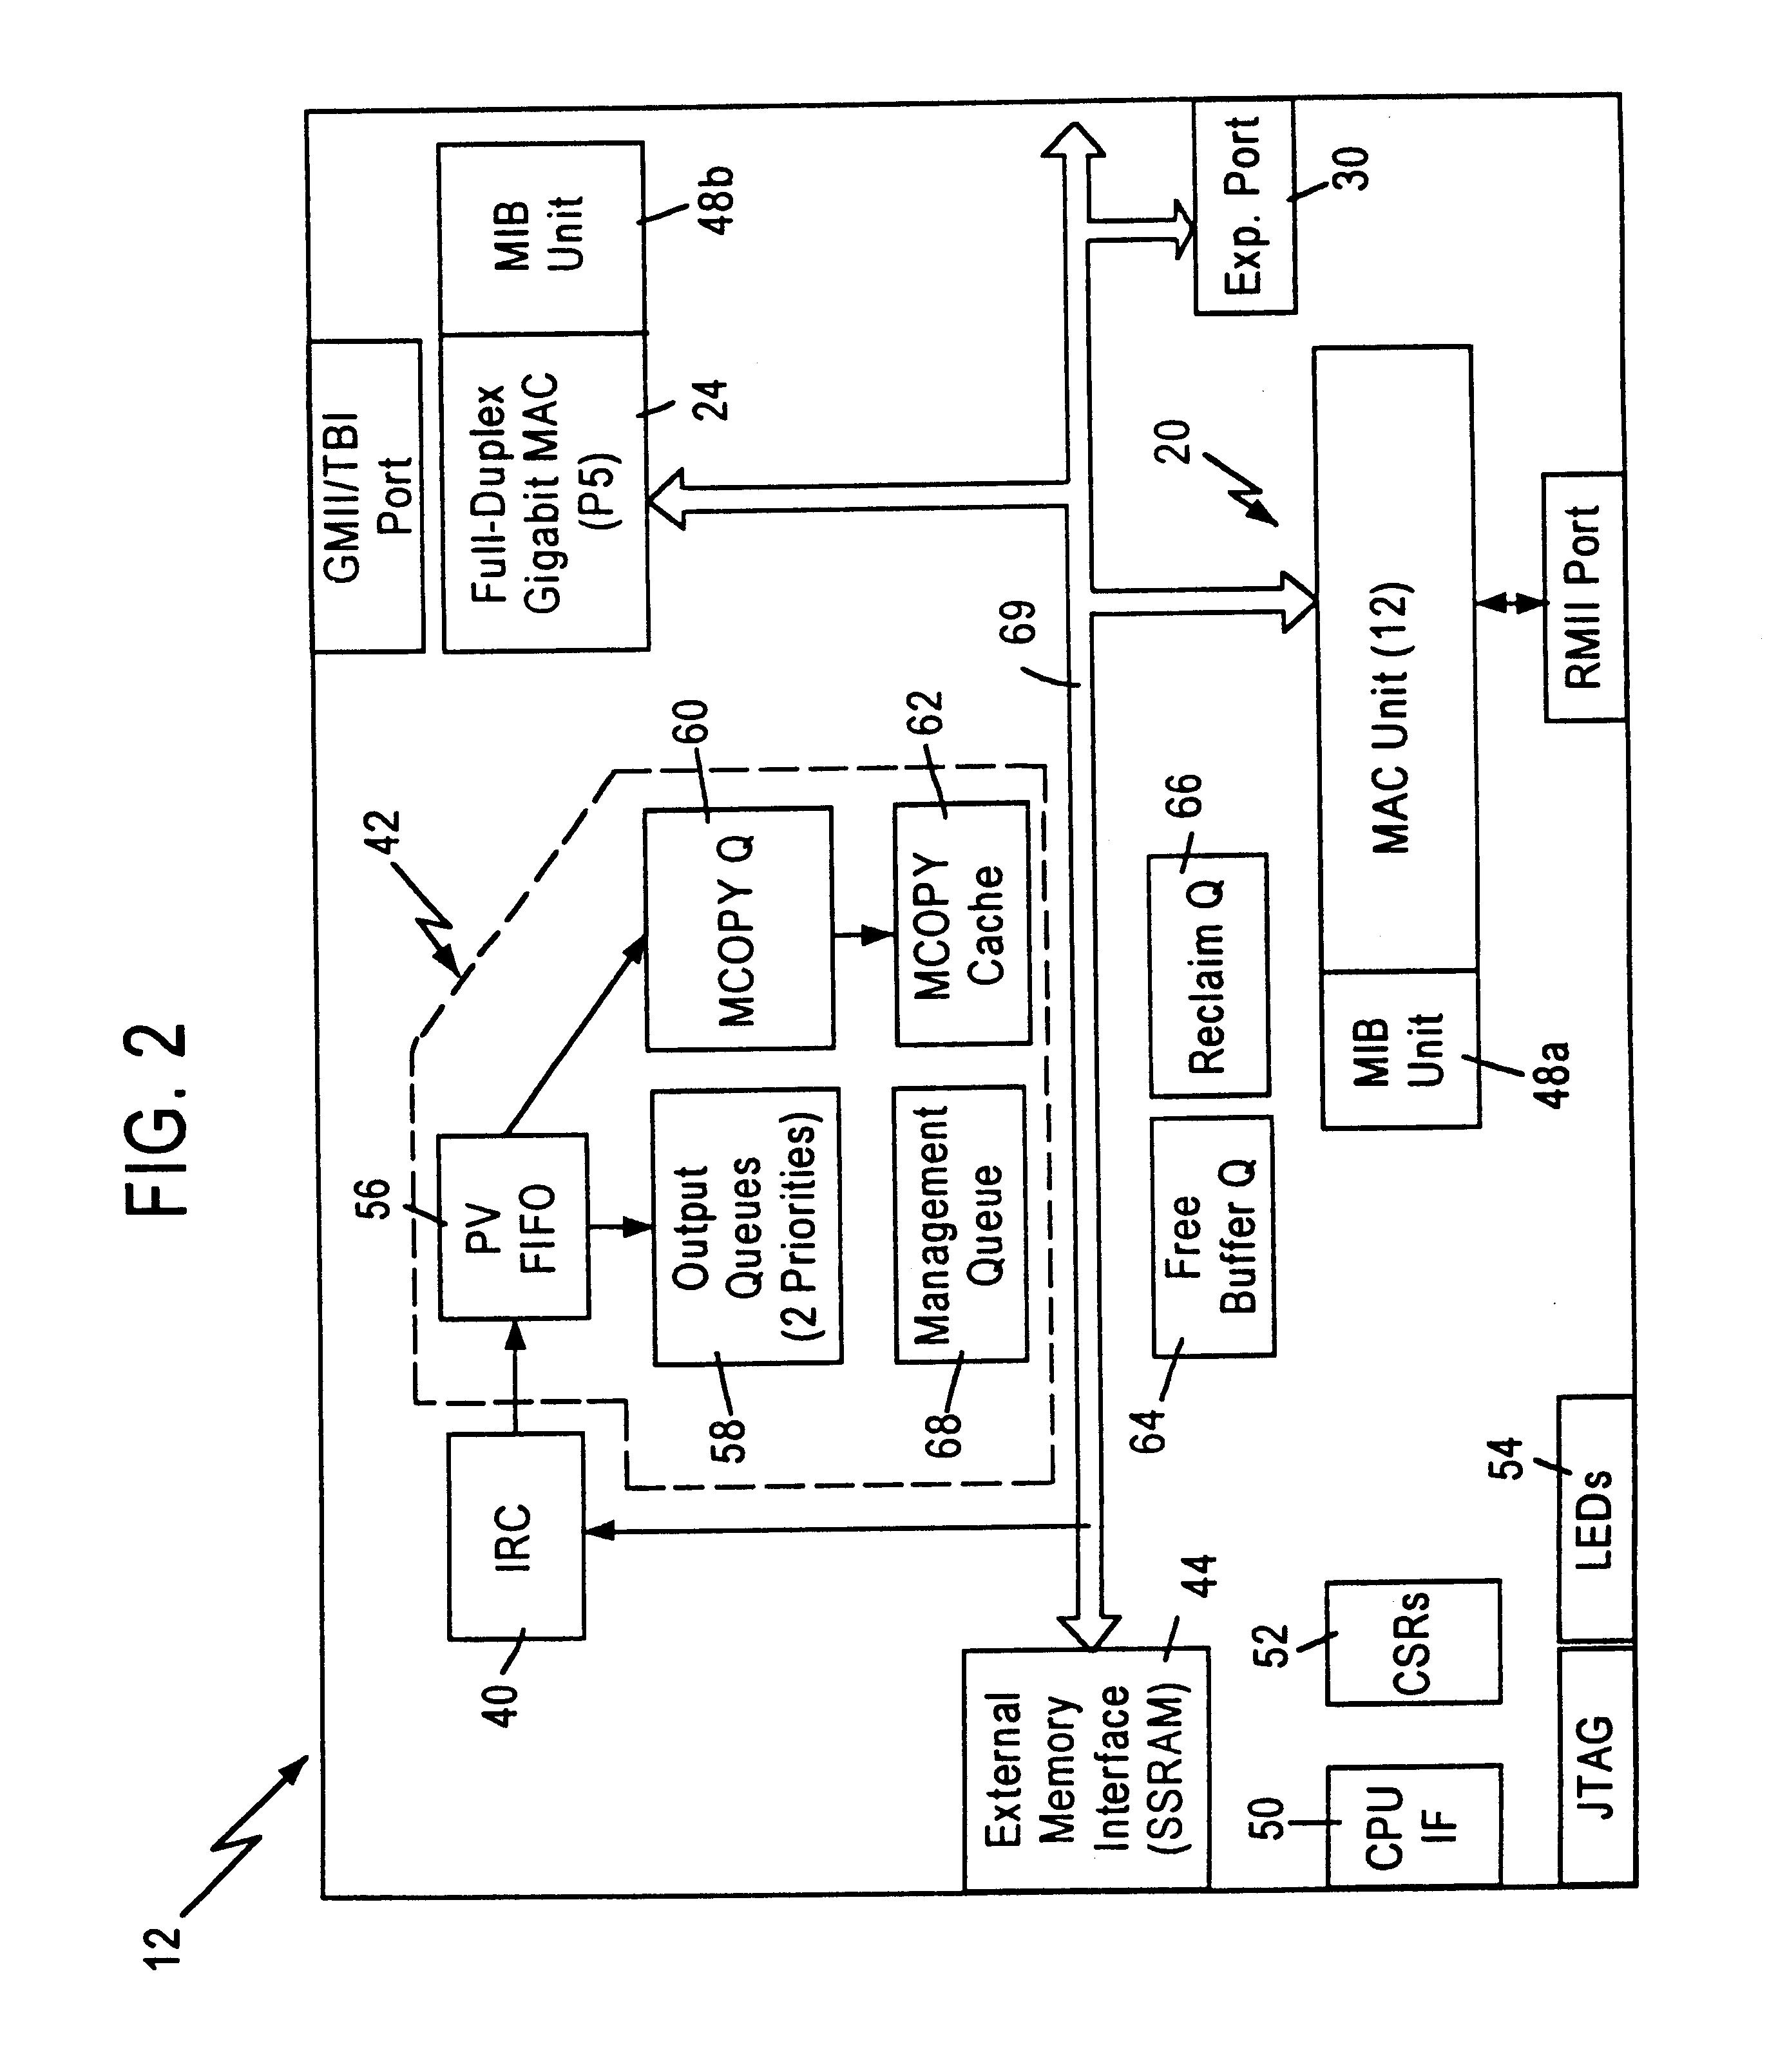 Common scalable queuing and dequeuing architecture and method relative to network switch data rate